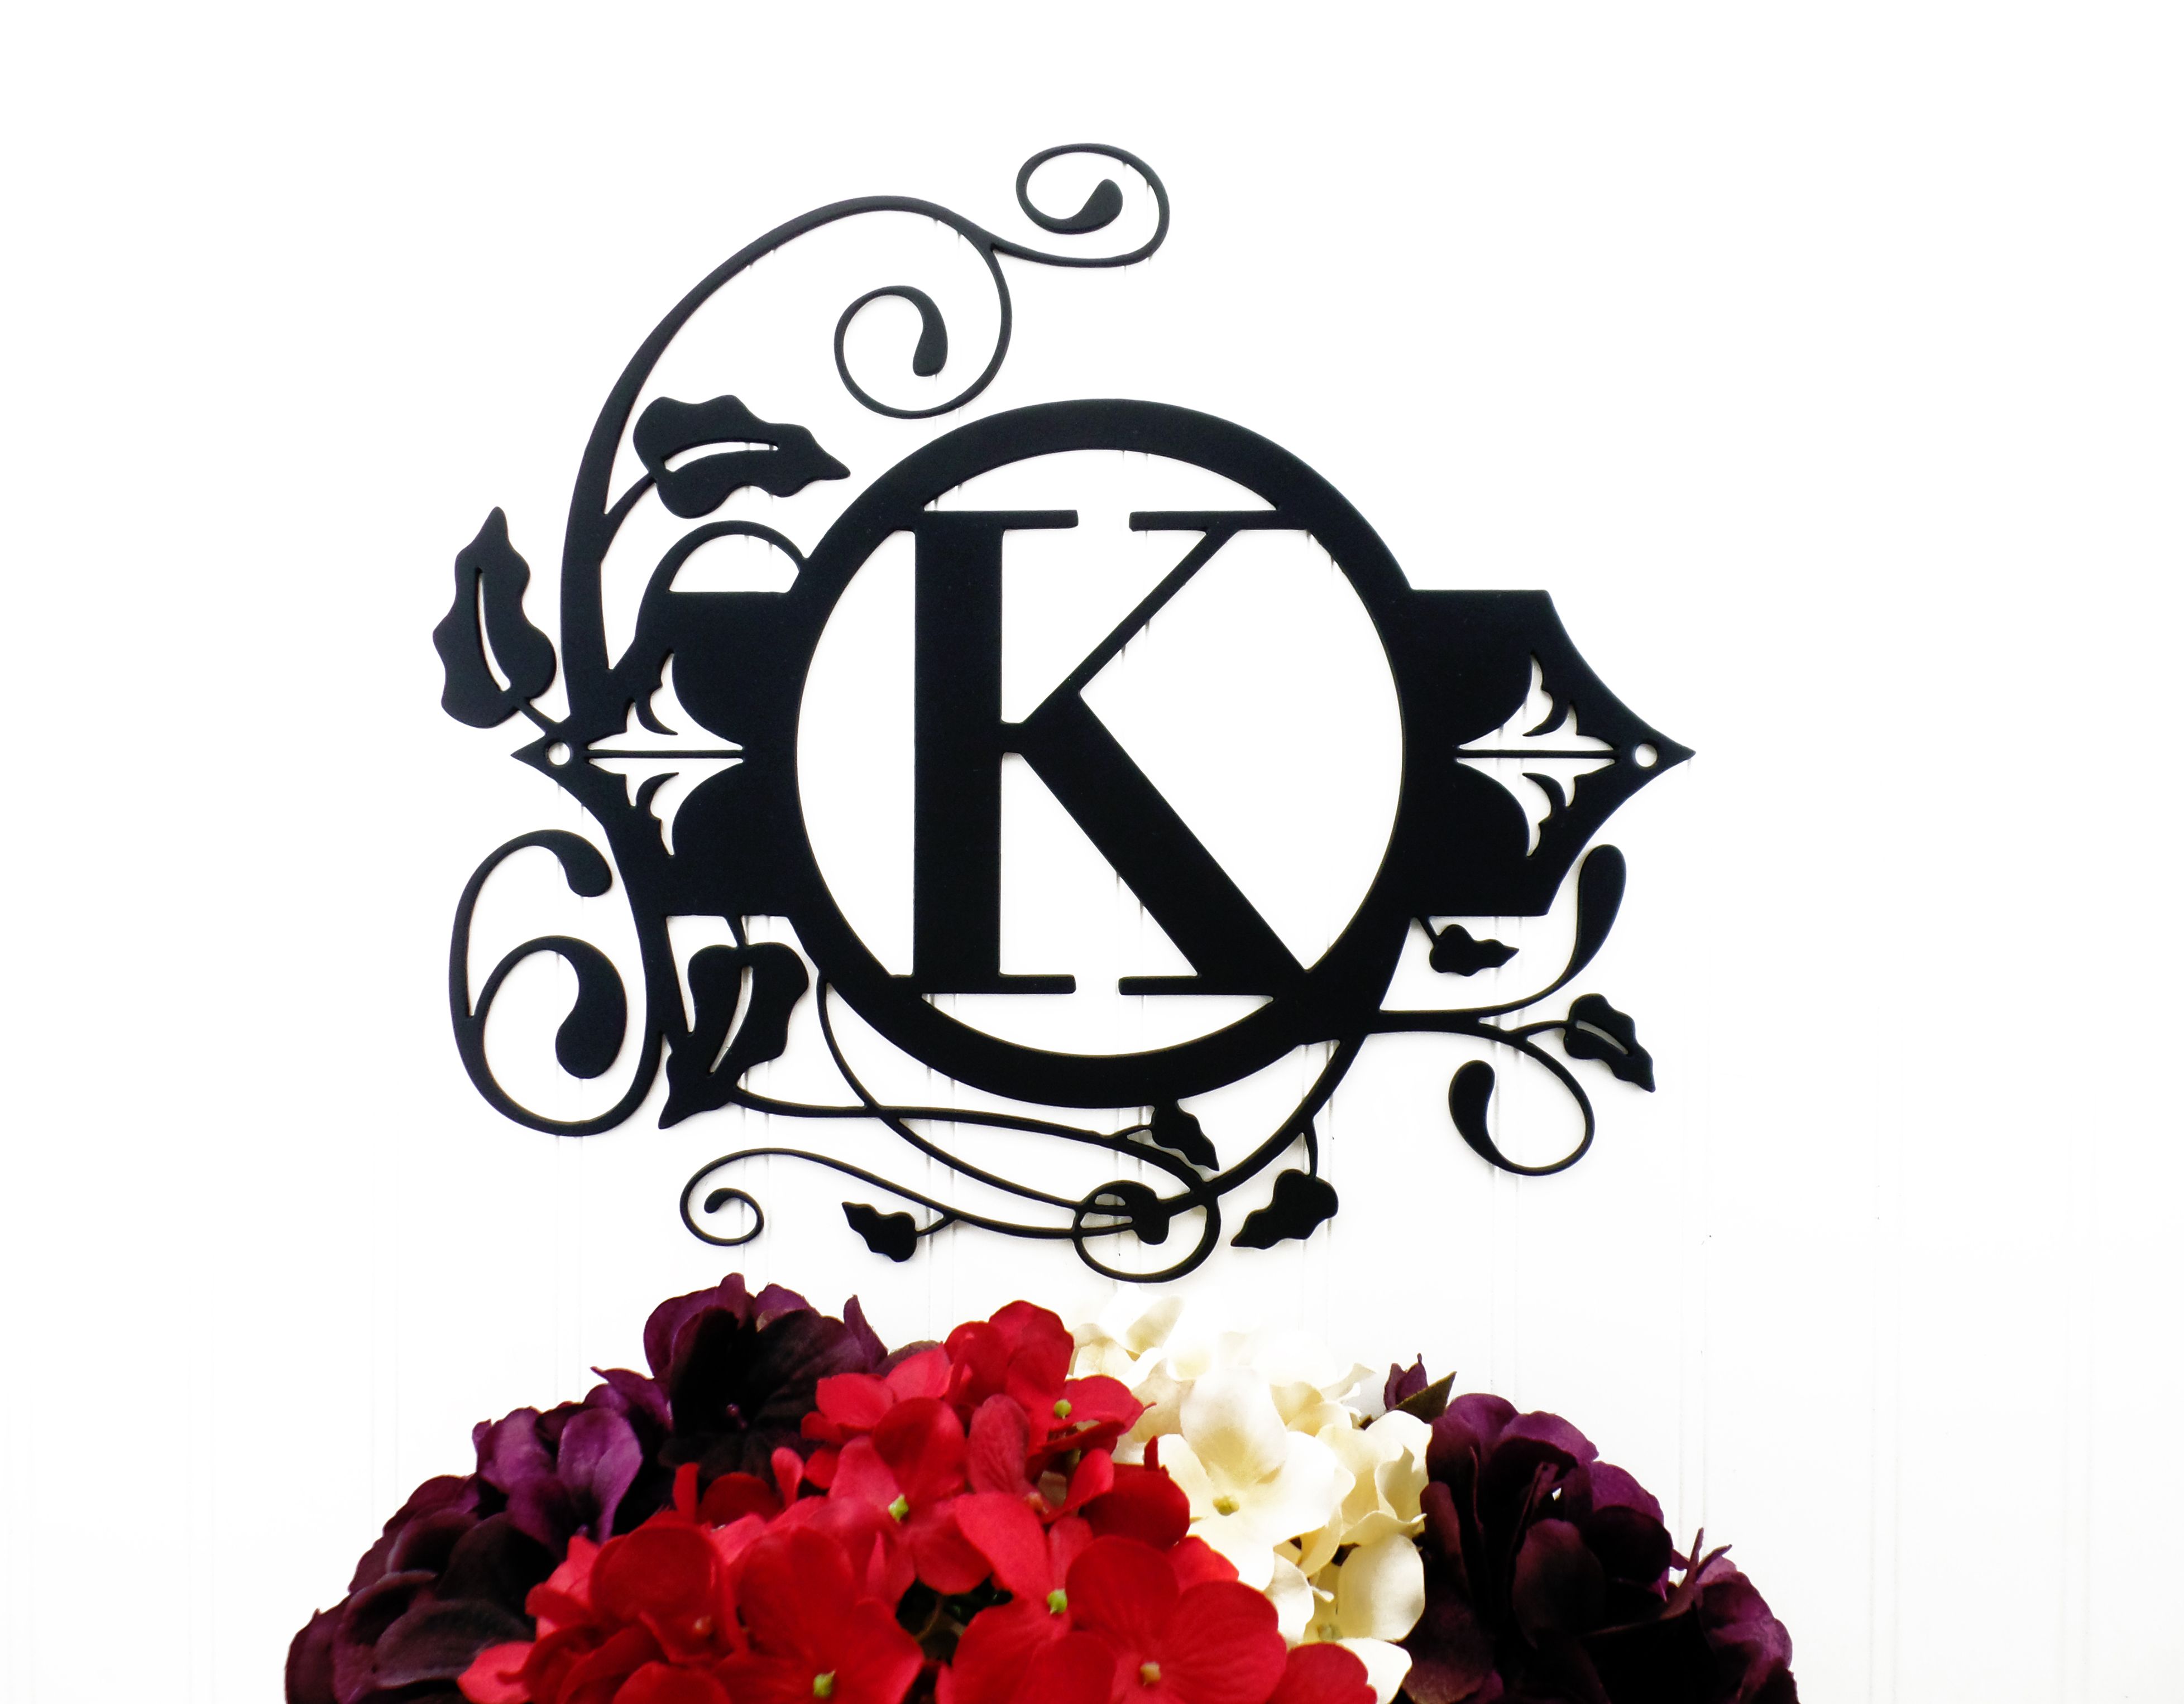 Buy a Hand Crafted Monogram Metal Sign - 13.5x12.5, made to order from Refined Inspirations, Inc ...